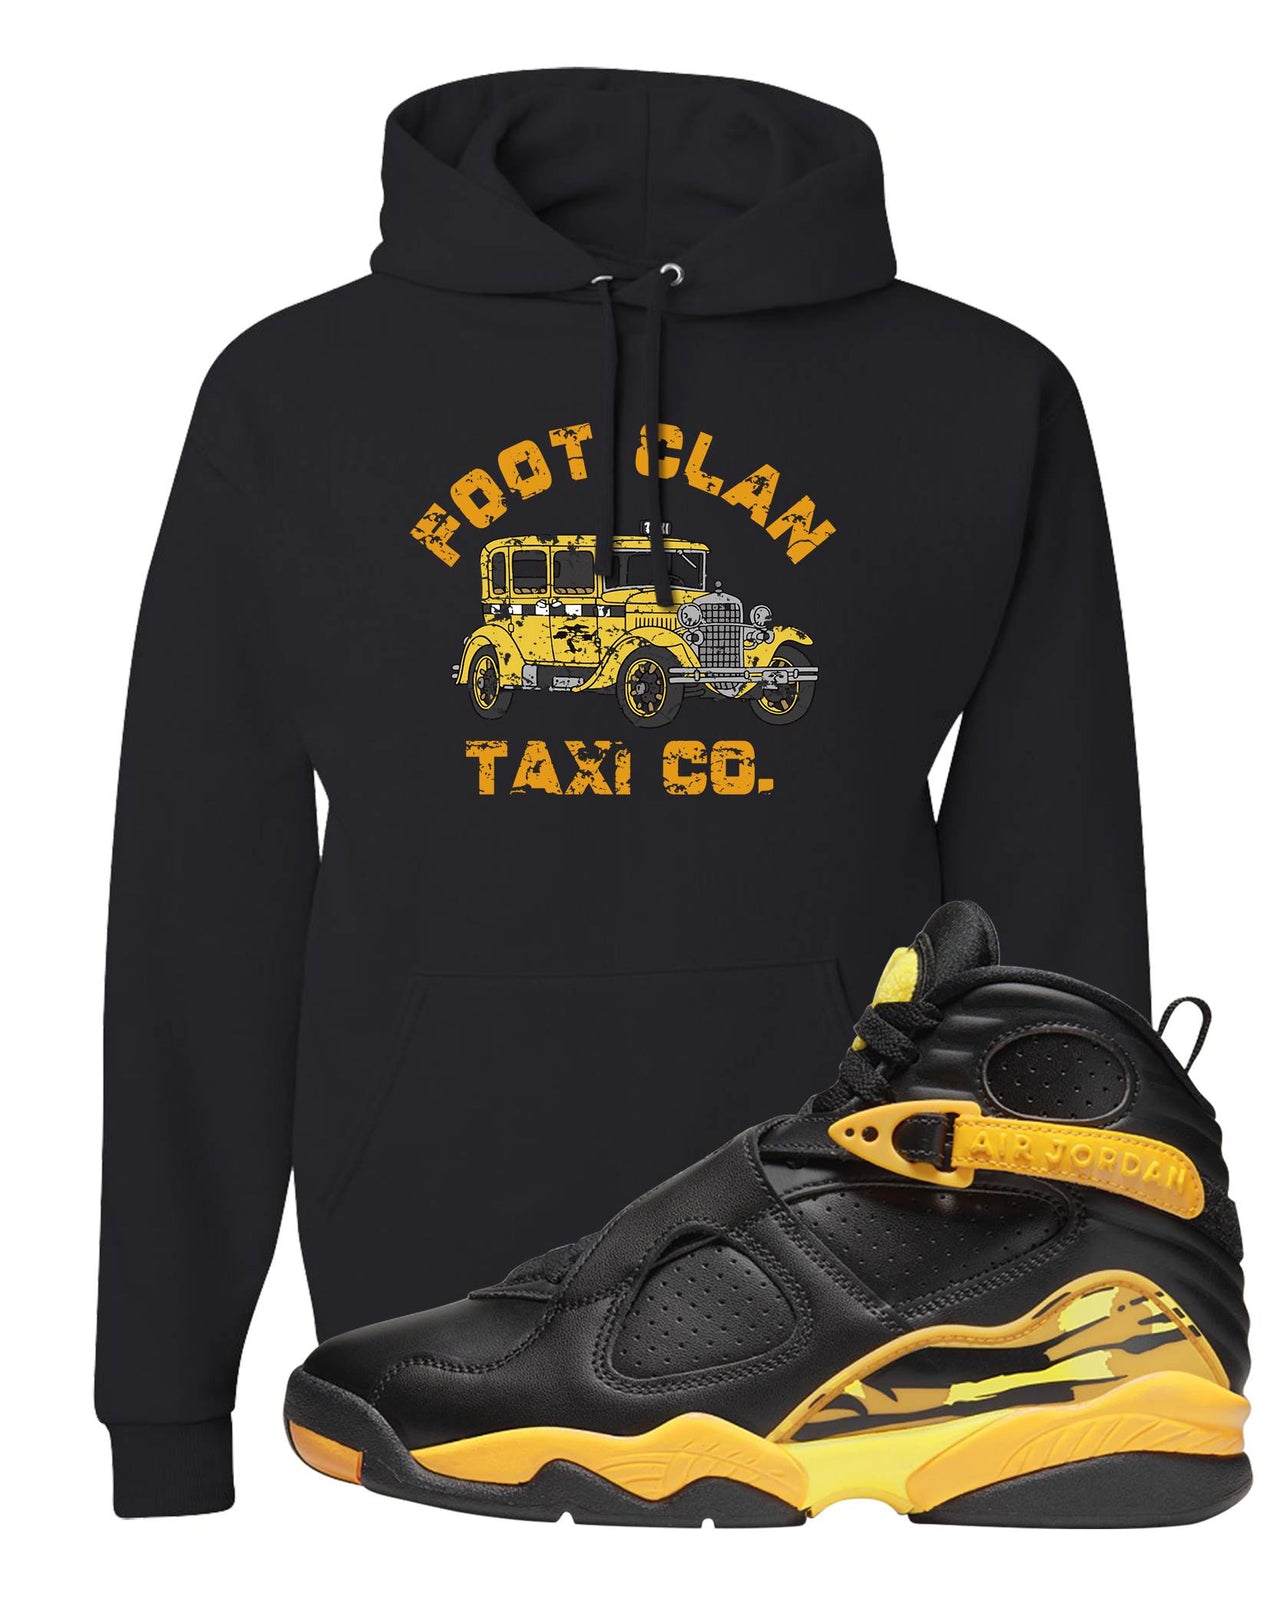 Taxi 8s Hoodie | Foot Clan Taxi Co., Black